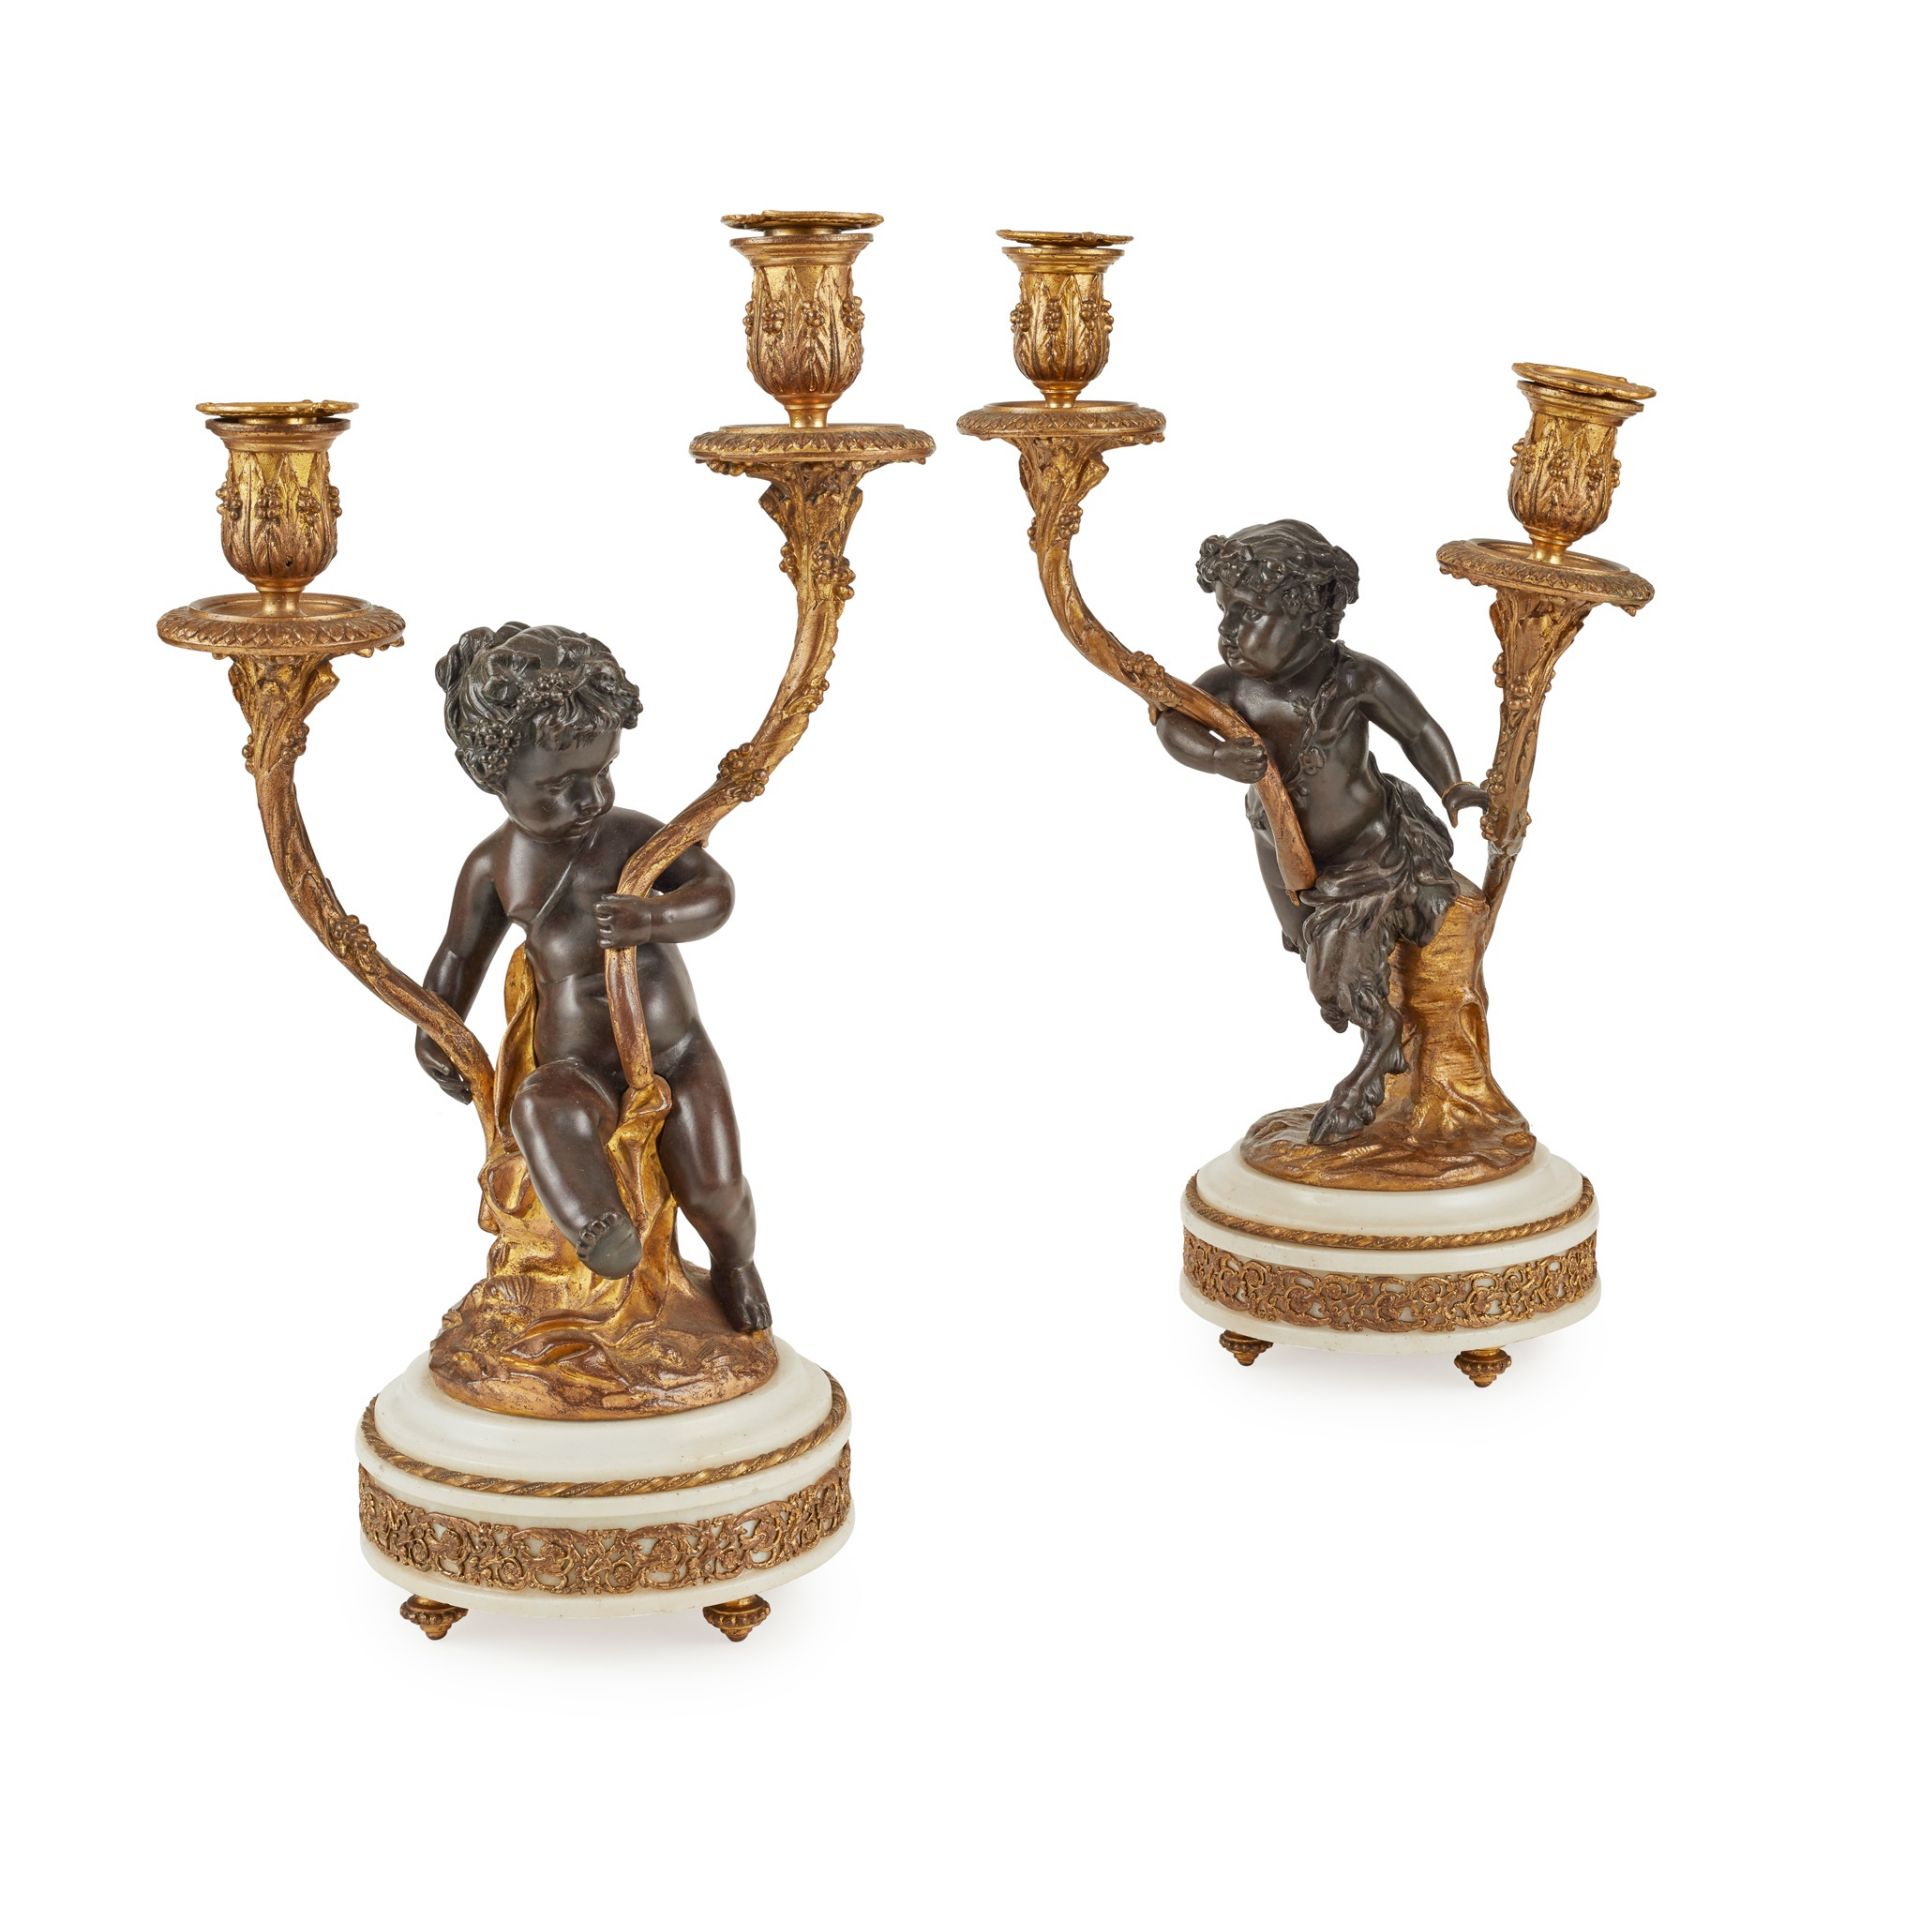 PAIR OF FRENCH GILT AND PATINATED BRONZE FIGURAL CANDELABRA, AFTER CLODION 19TH CENTURY